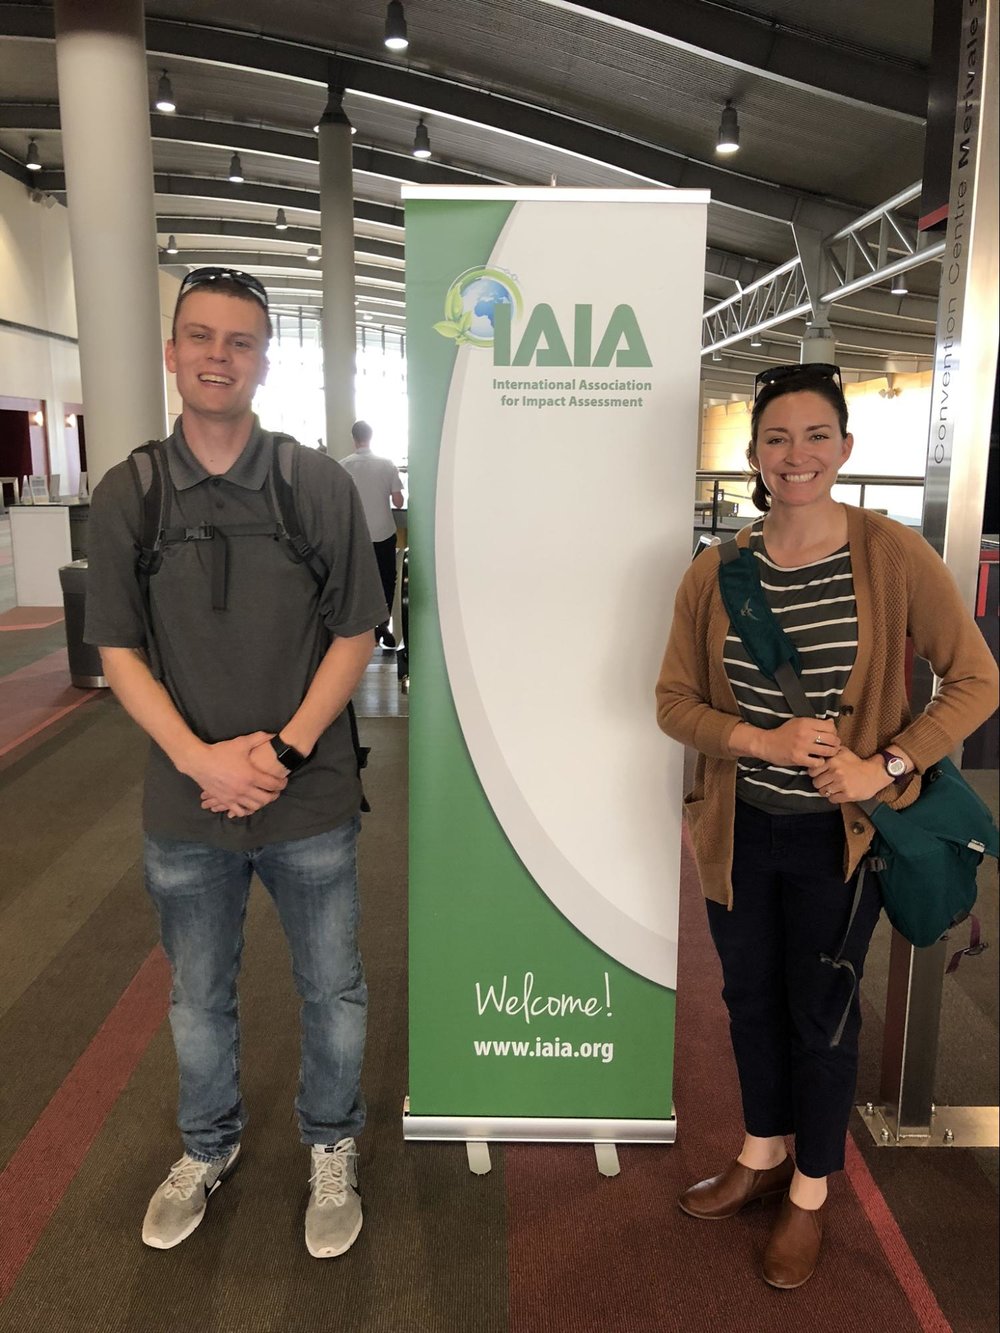  Attending the pre-conference SIA training course was a blast and offered a unique perspective from practitioners and professionals working in IA worldwide.  